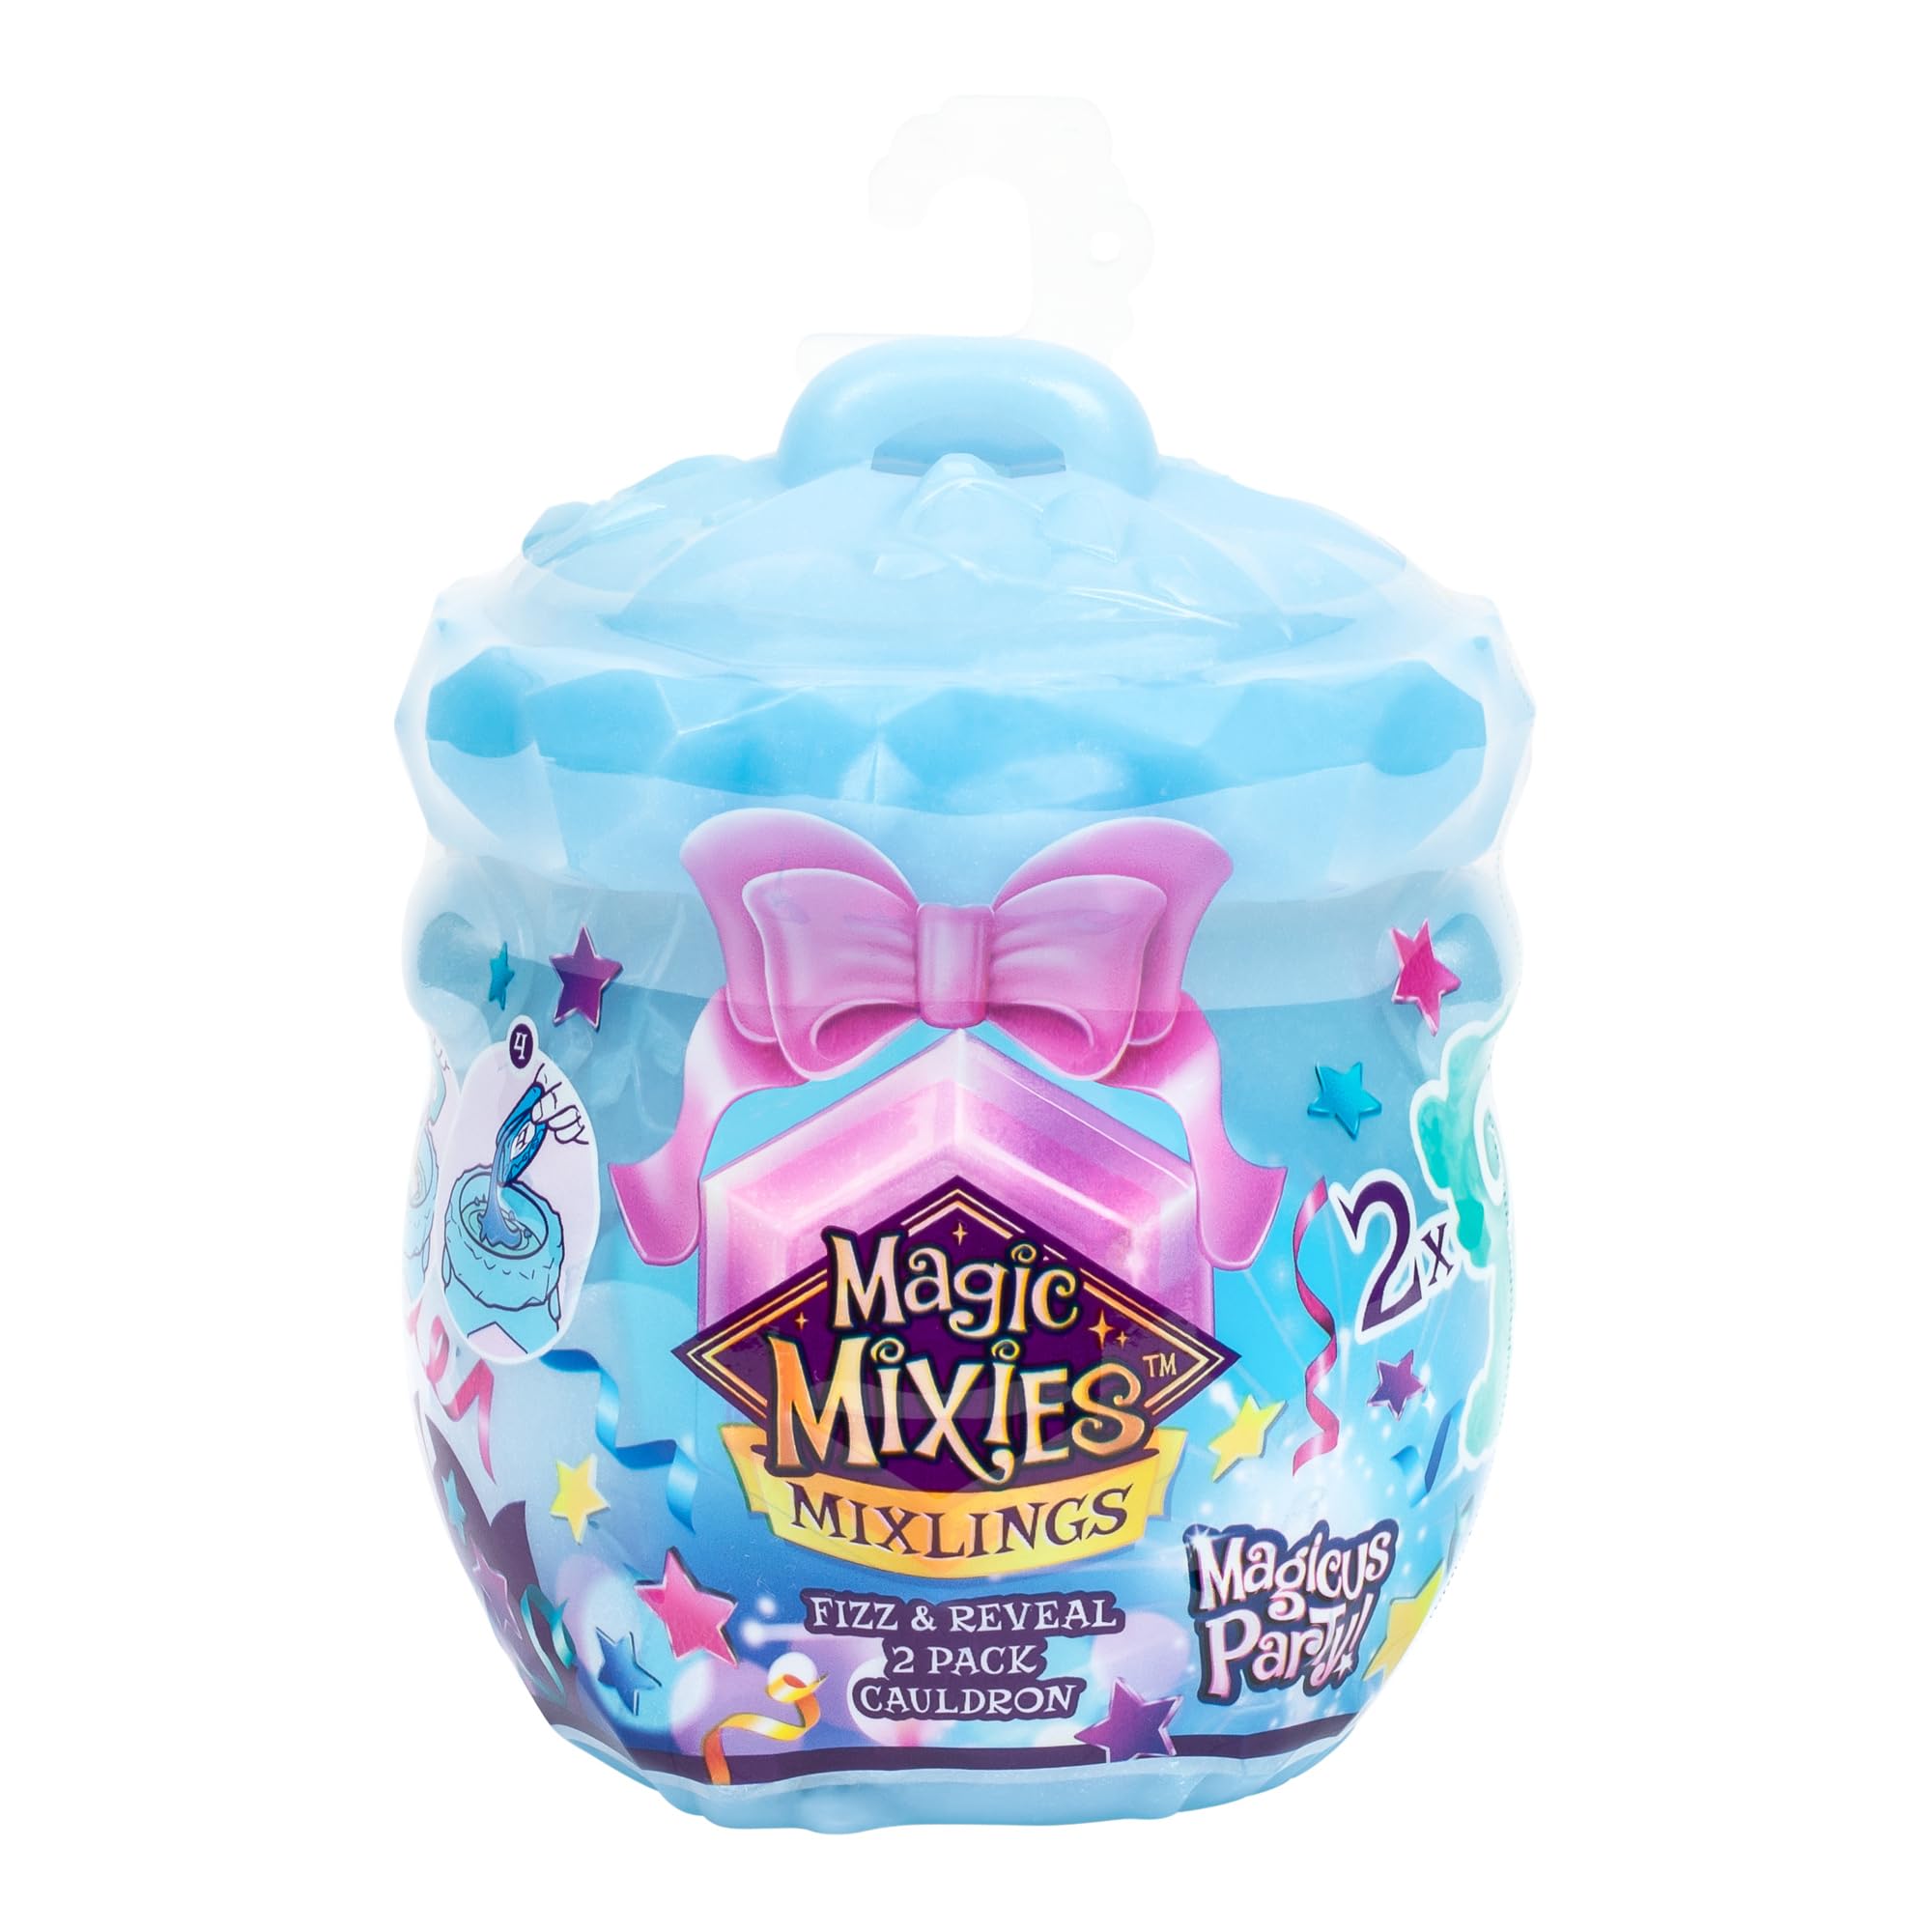 Magic Mixies Mixlings Magicus Party Fizz & Reveal 2 Pack Cauldron | with Magical Confetti Fizz Unboxing | 4 New Magicus Party Mixling Powers to Discover | 30+ to Collect